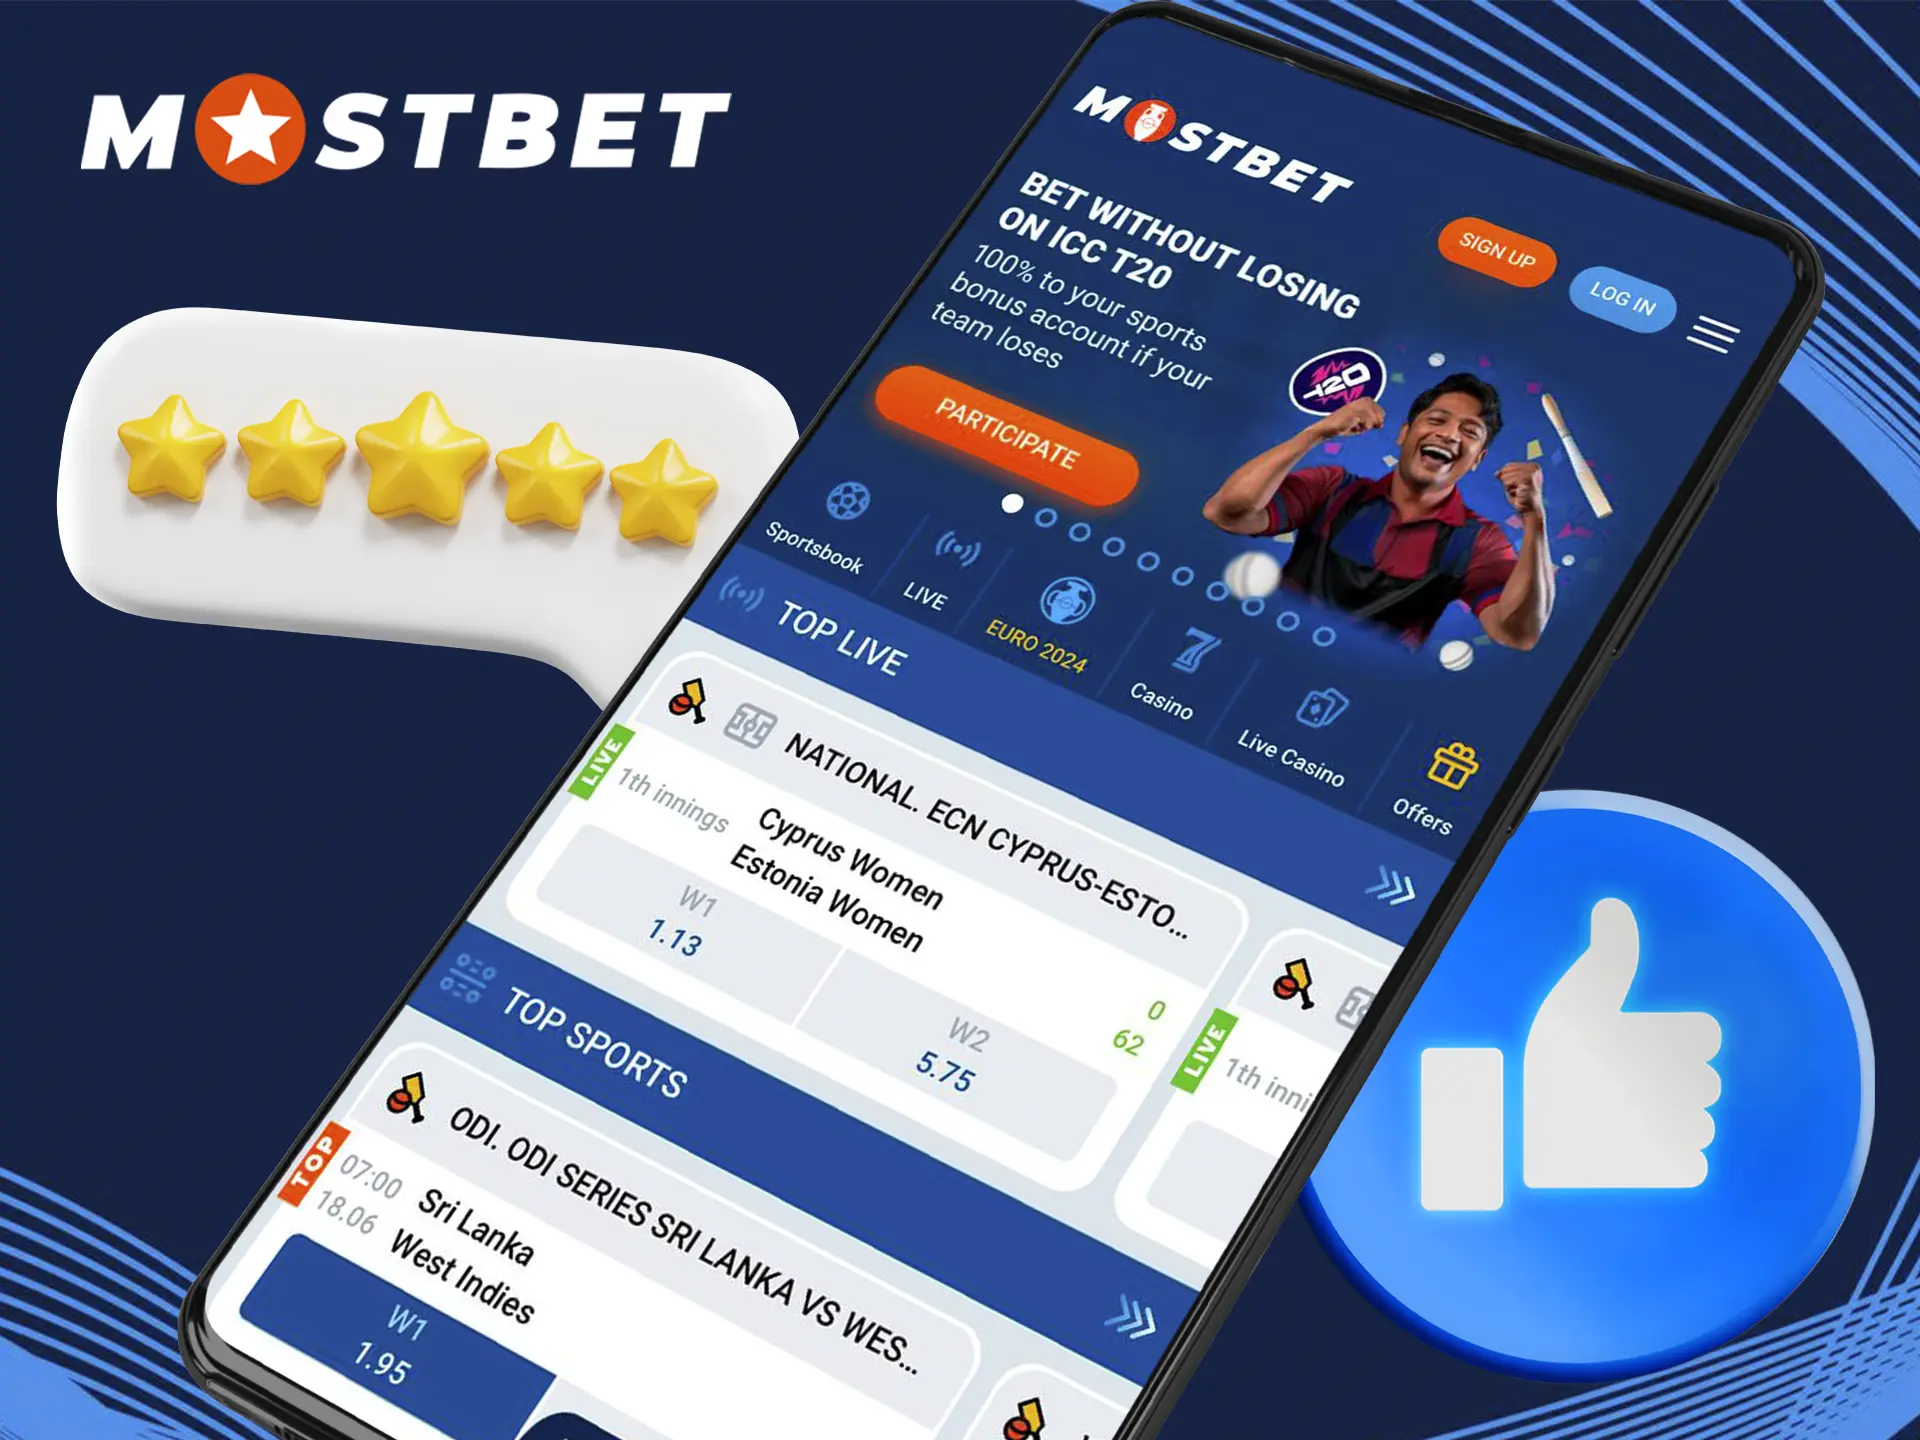 High marks from Mostbet users characterise it as a quality and stable casino.